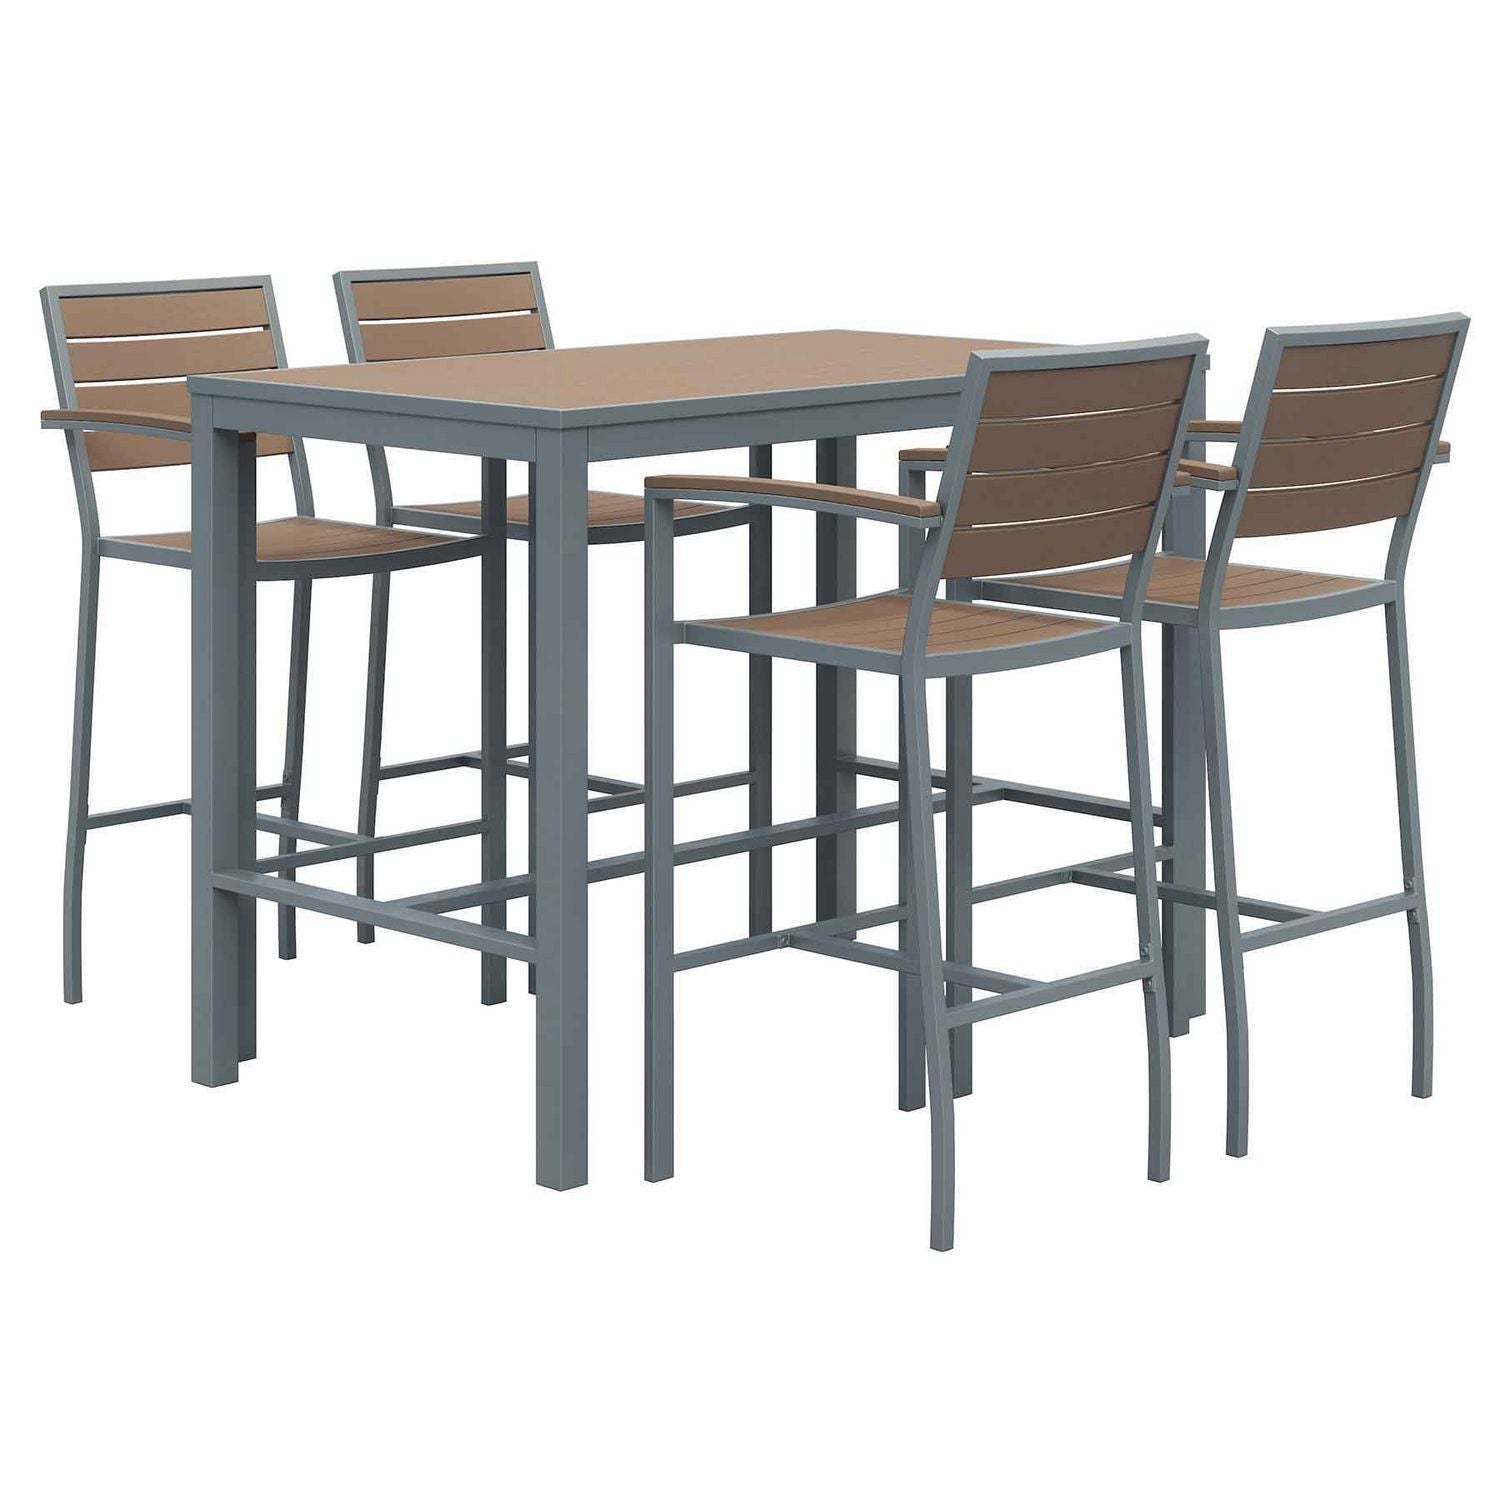 eveleen-outdoor-bistro-patio-table-with-four-mocha-powder-coated-polymer-barstools-32-x-55-mocha-ships-in-4-6-bus-days_kfi840031925190 - 1